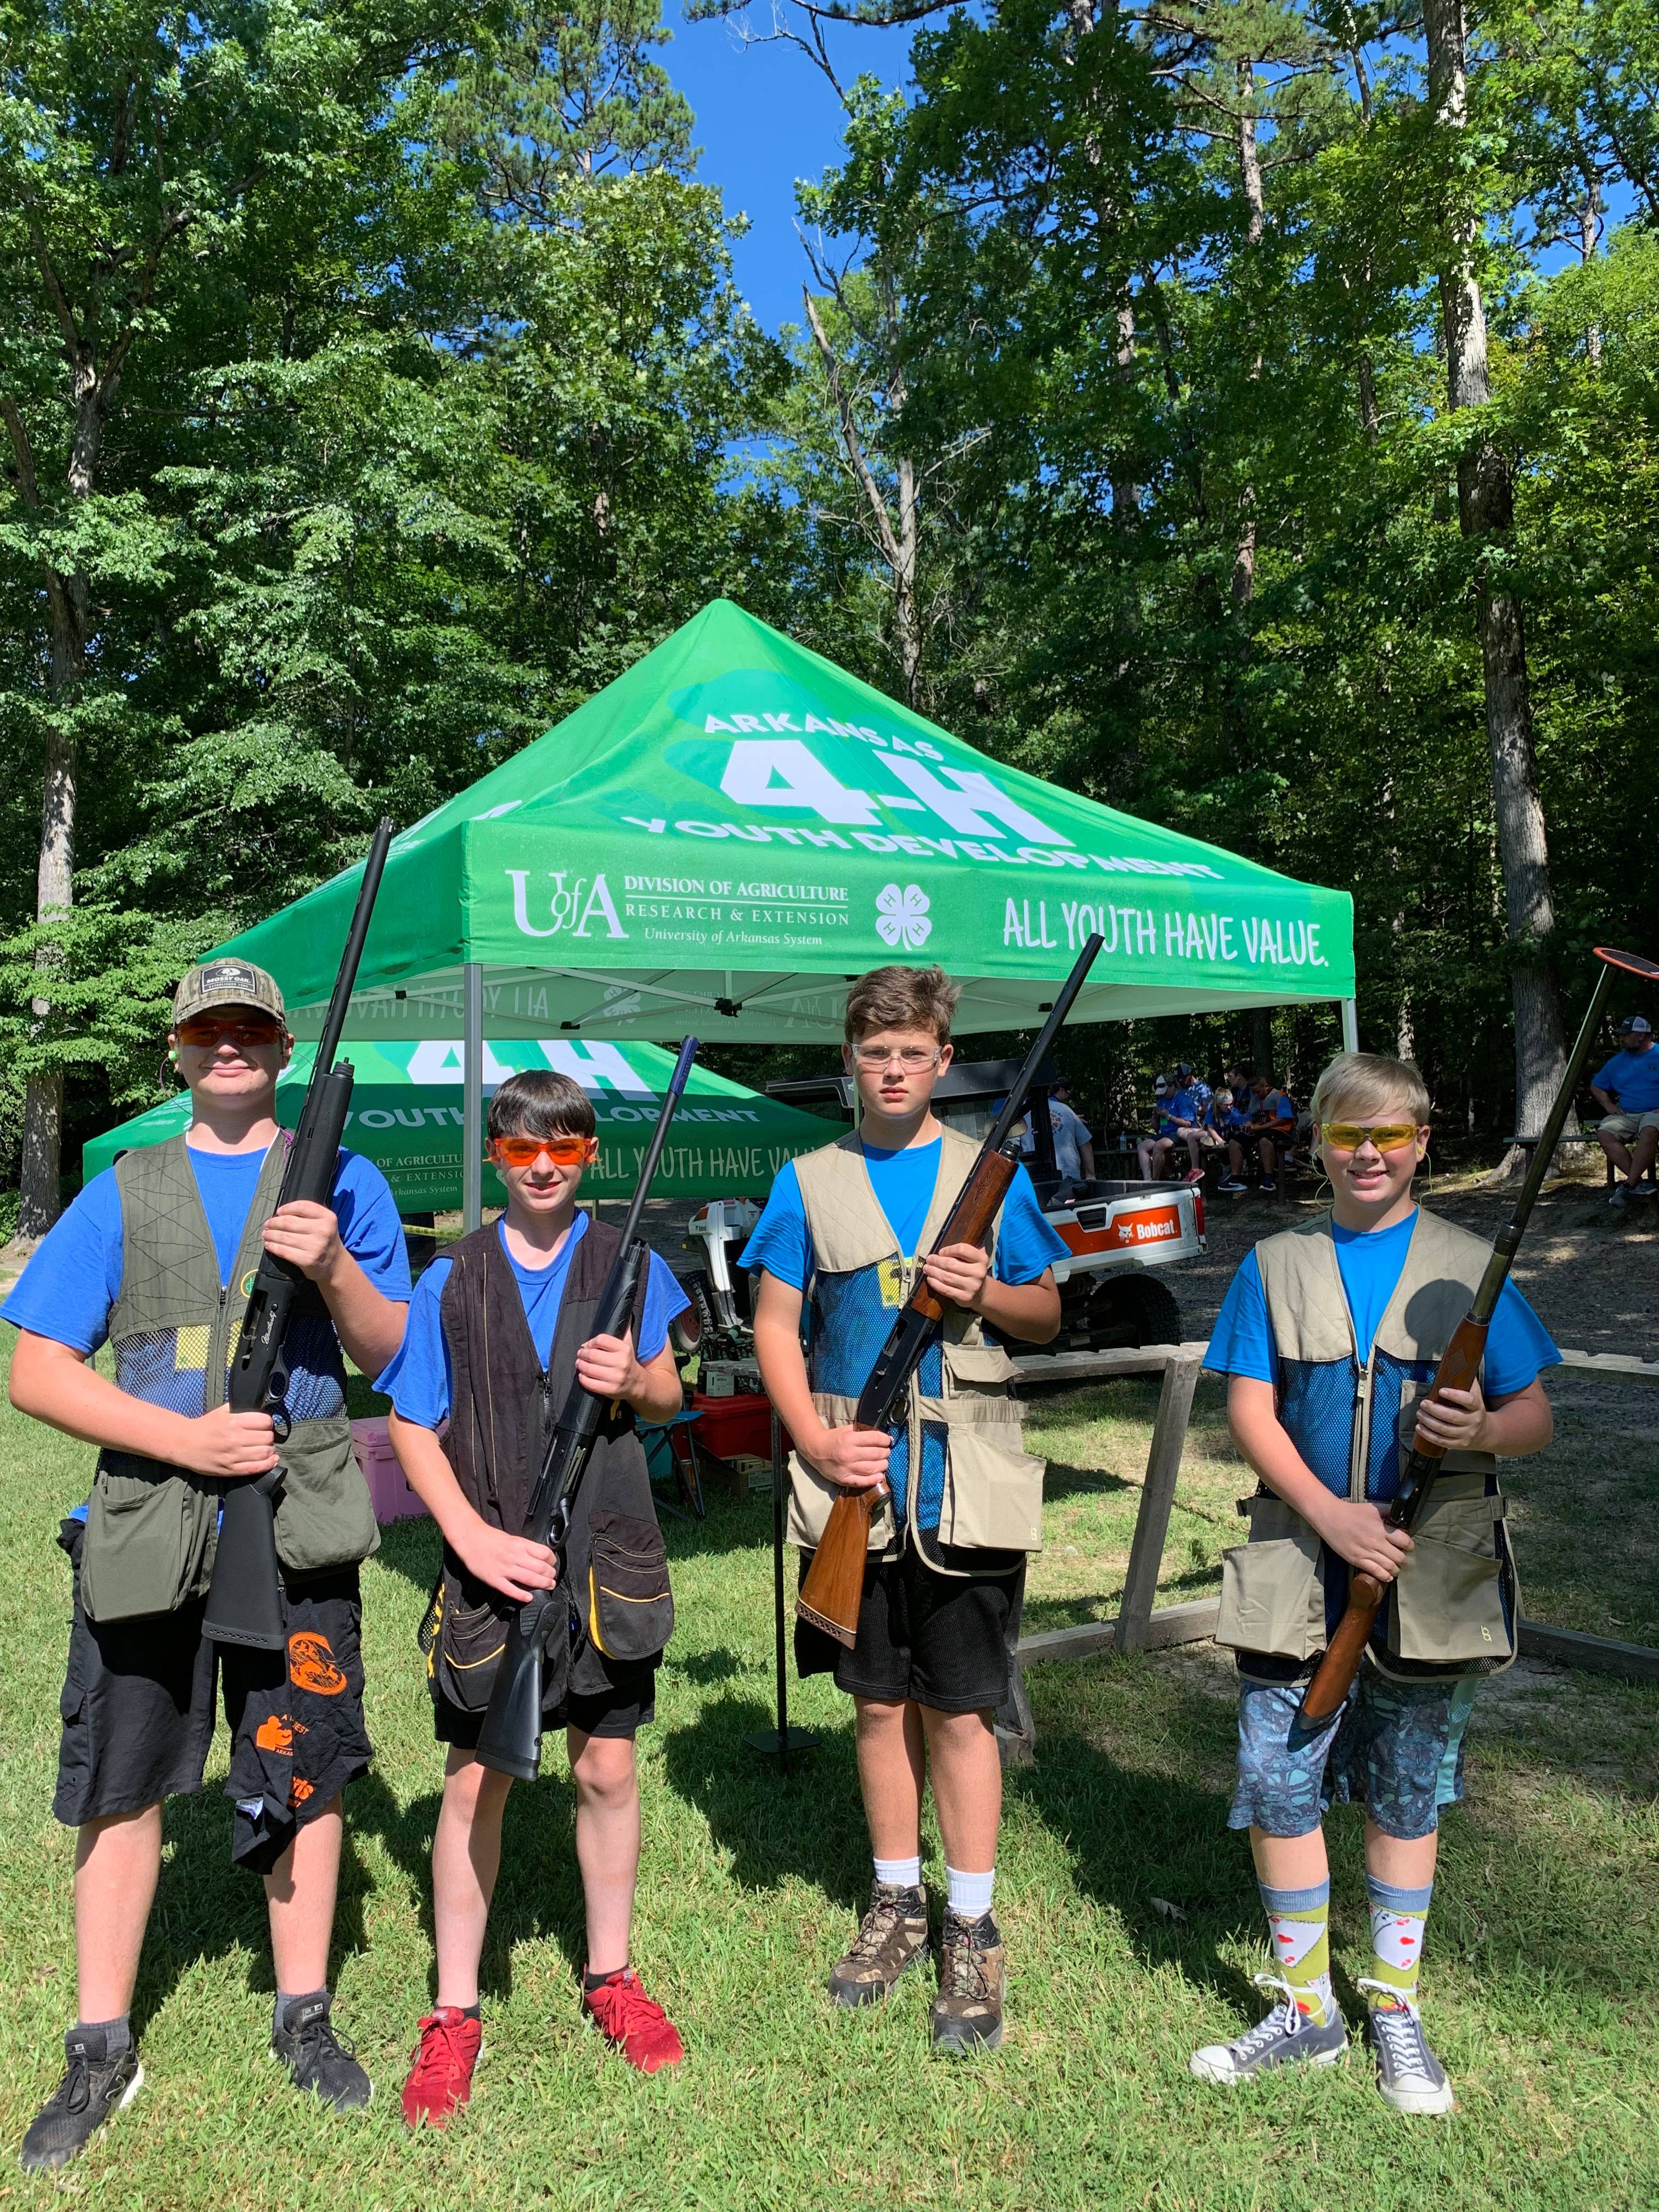 Male 4-H Youth outdoors, safely holding firearms before competing in shooting sports competition.